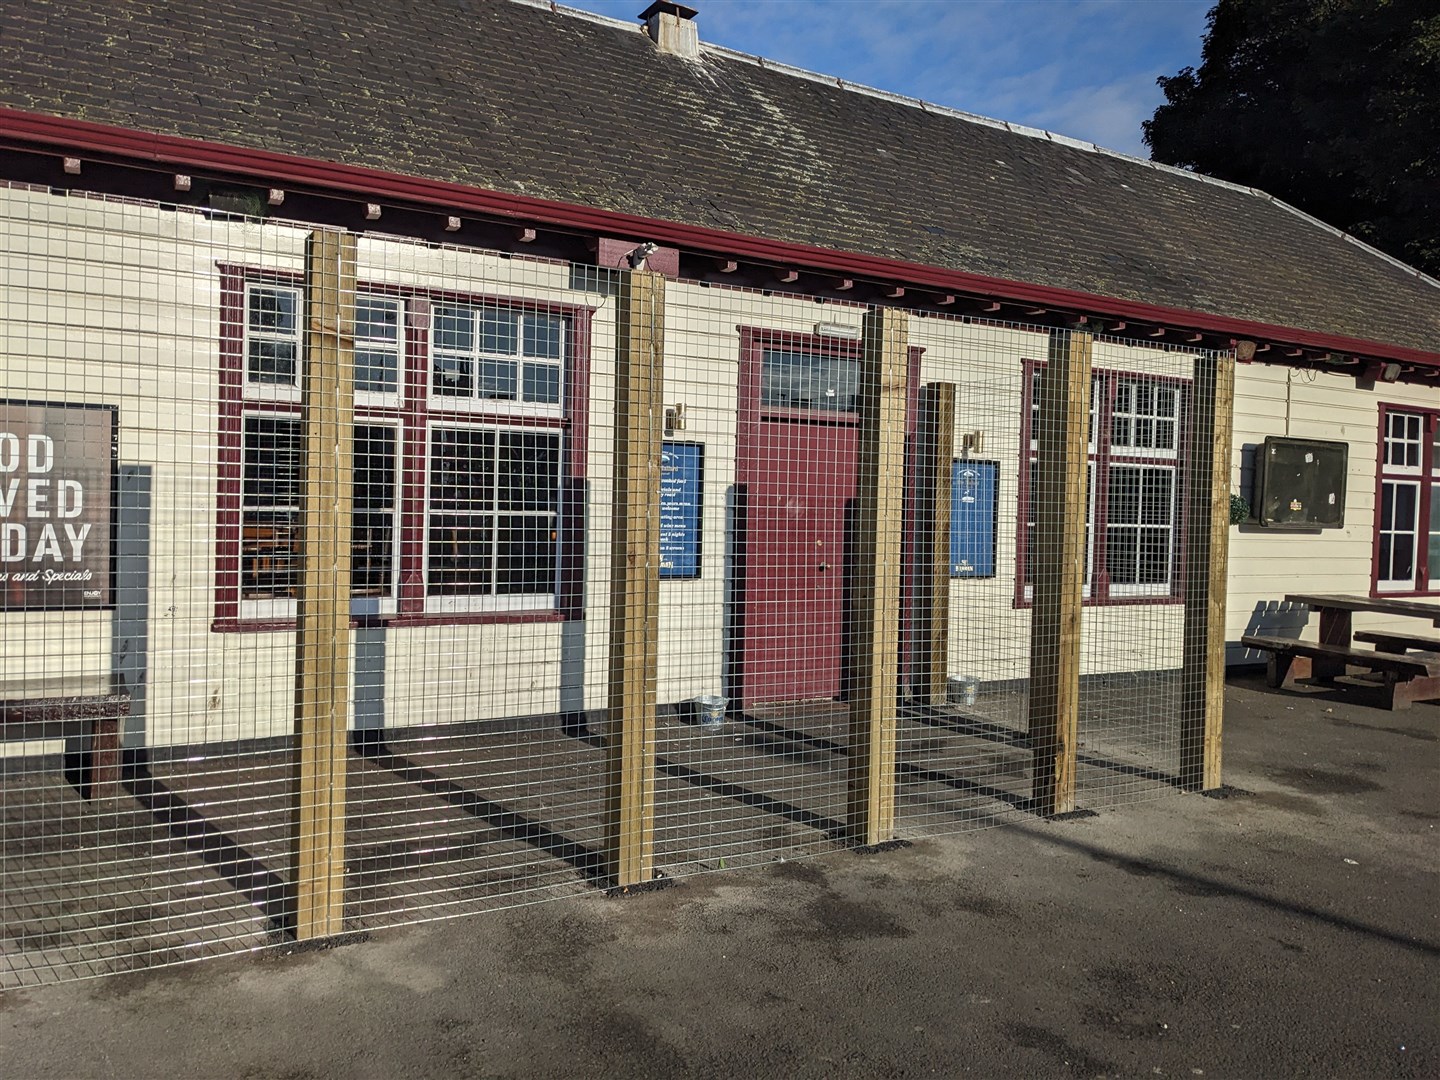 A fence has been erected around the rear entrance to the Mallard Pub in Dingwall.